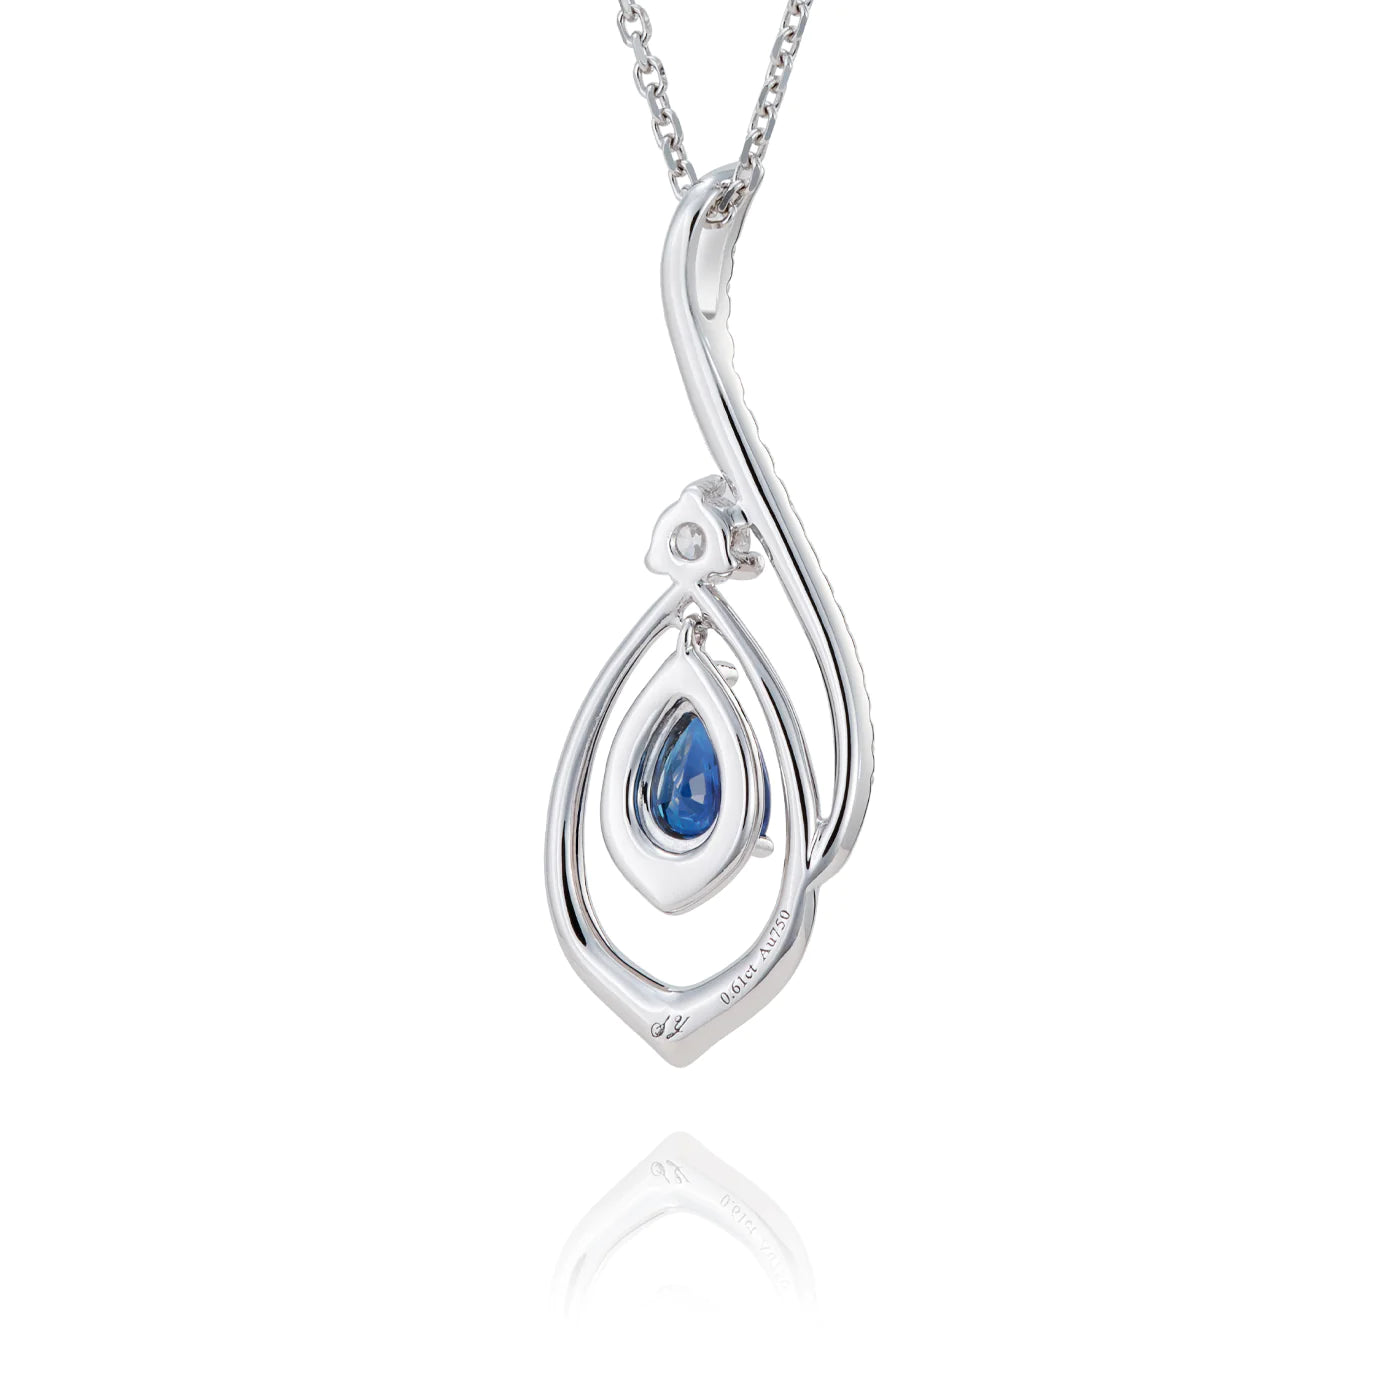 The Heavenly Phoenix Necklace 18kt White Gold with Sapphire